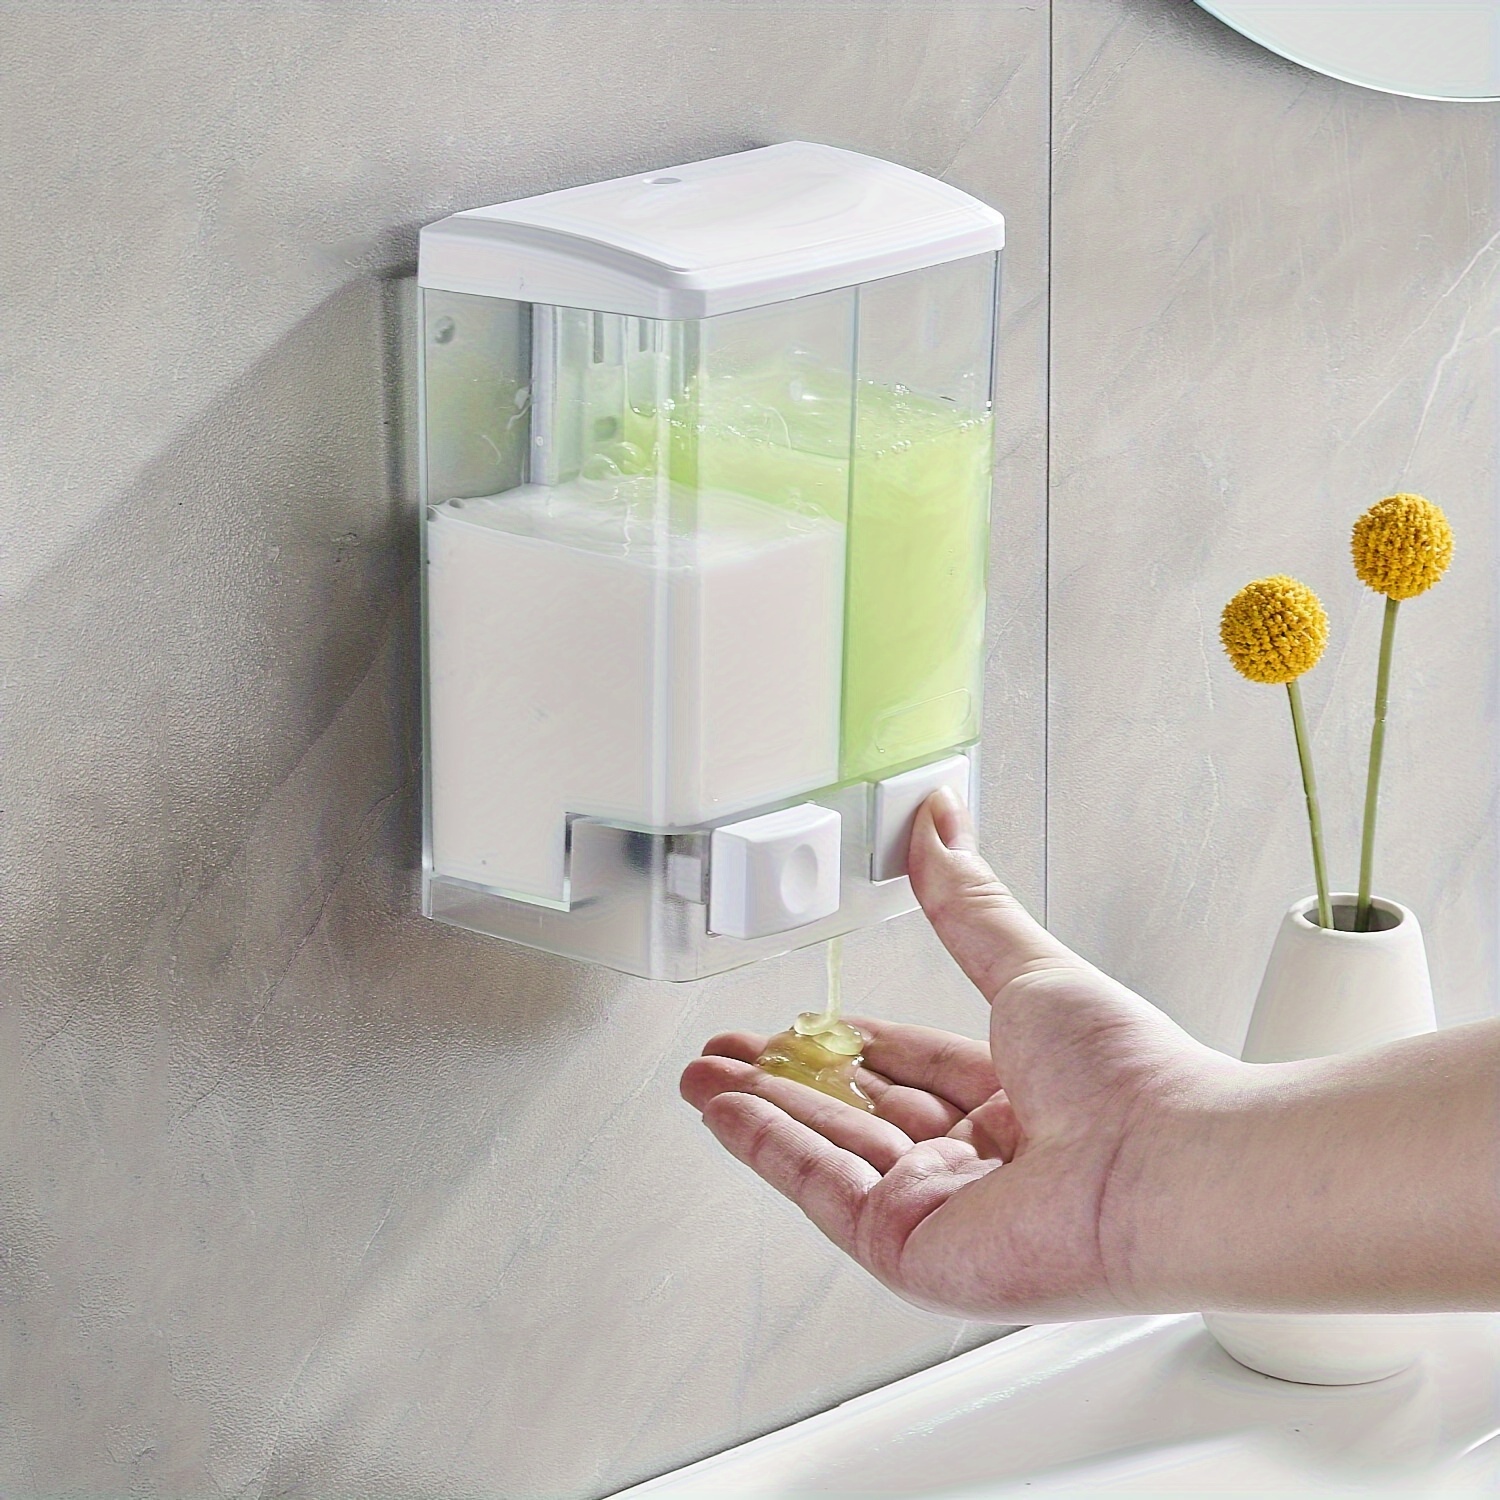 

1pc Wall-mounted Double Soap Dispenser, Plastic, Manual Press, Liquid Soap Container For Bathroom & Hotel Use